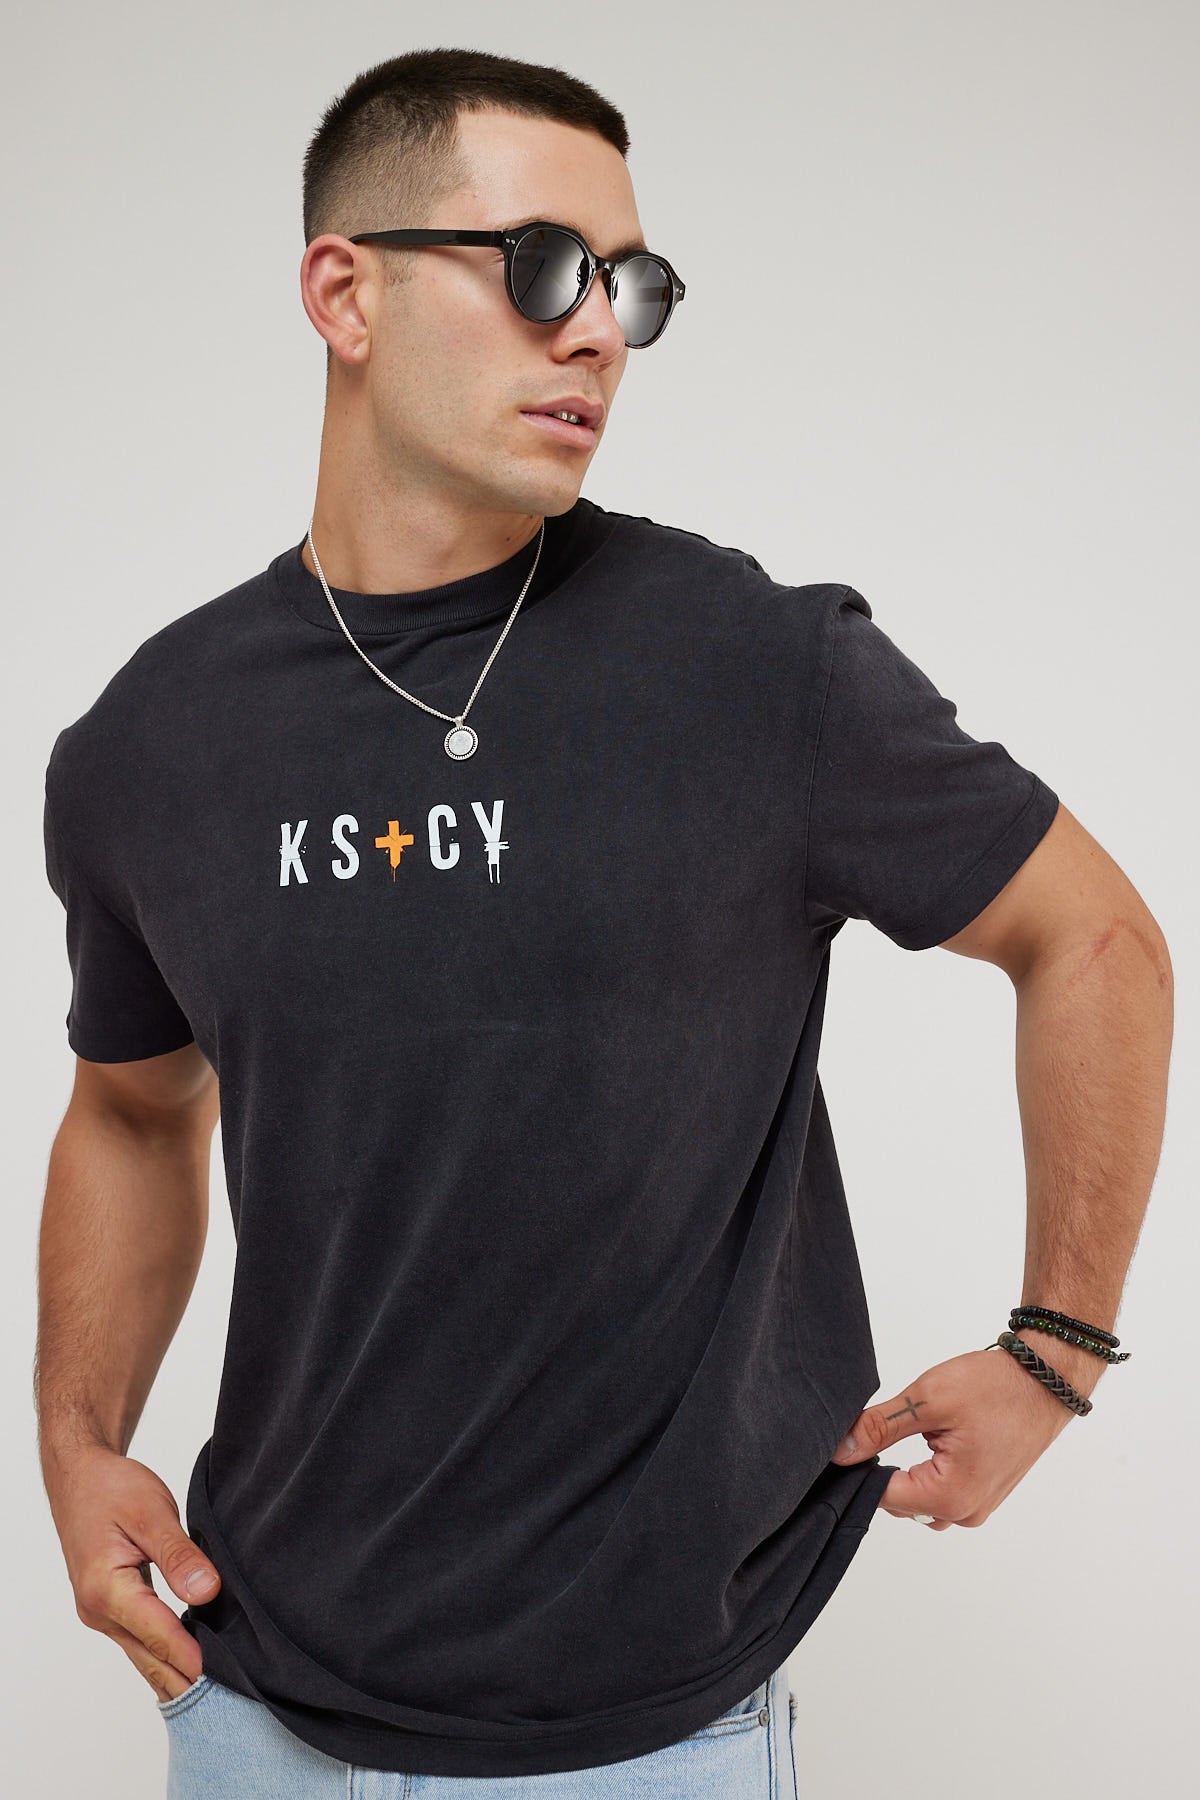 Kiss Chacey Establishment Relaxed Tee Mineral Black